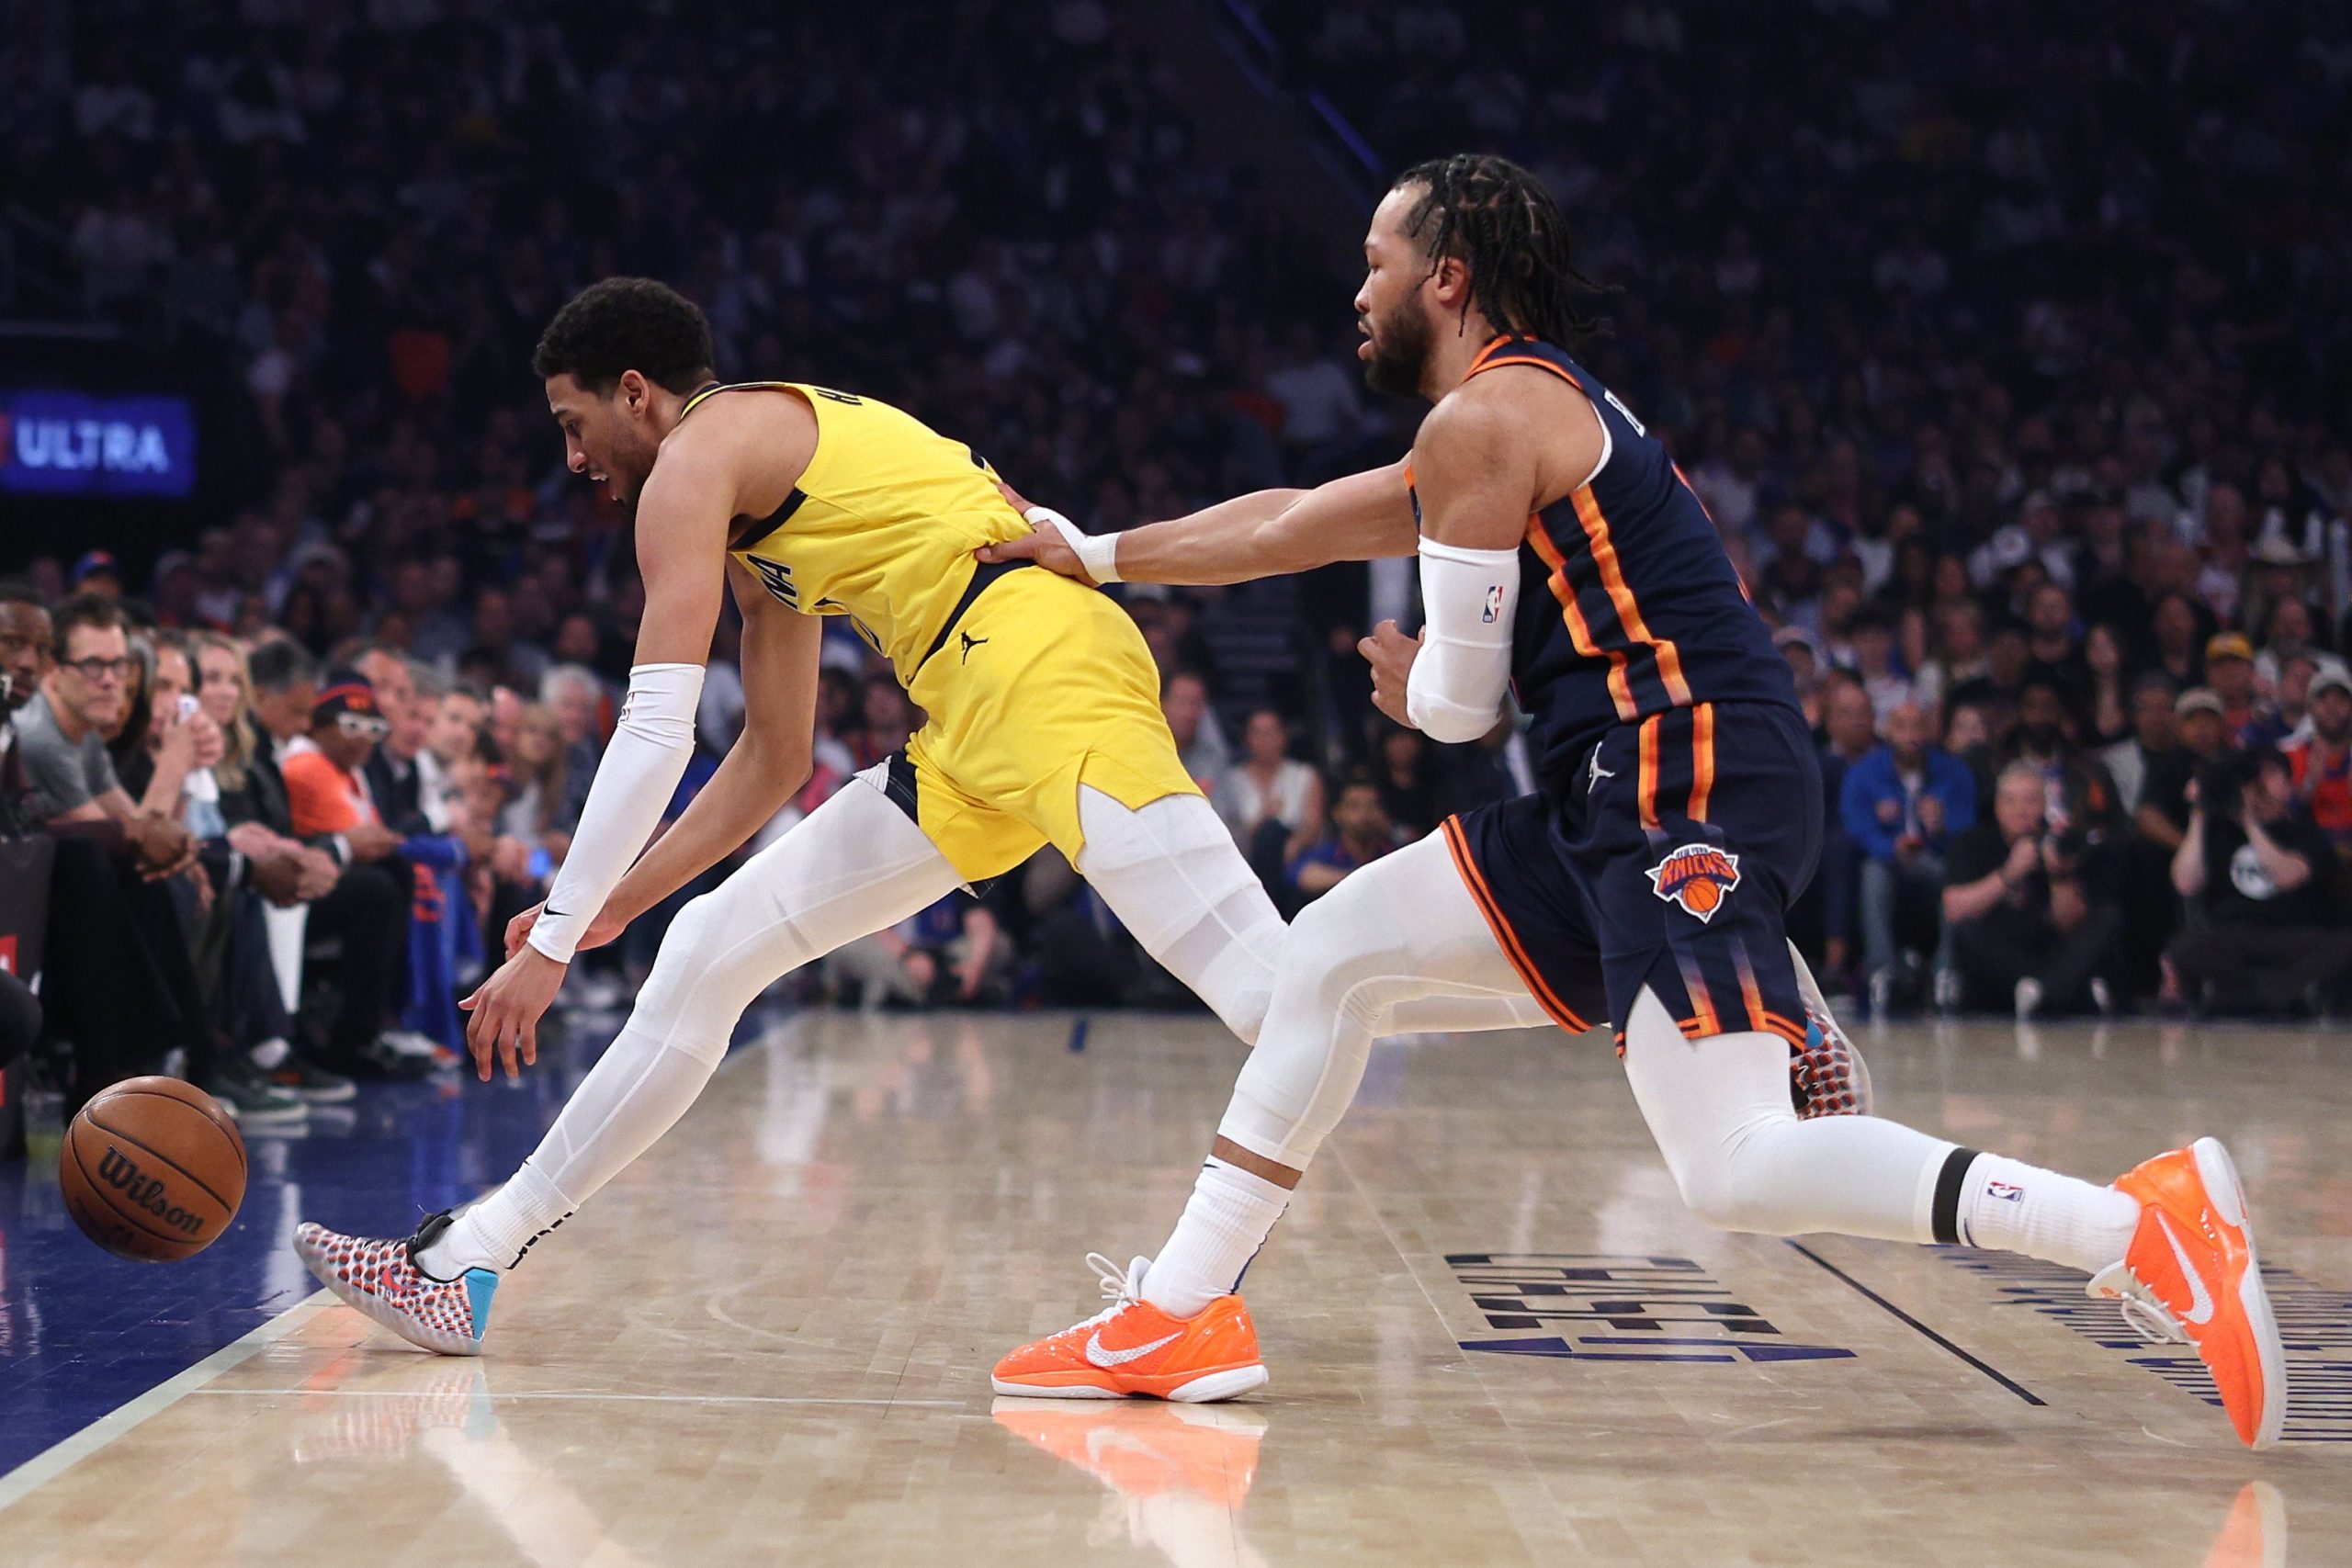 Tyrese Haliburton of the Indiana Pacers chases a loose ball